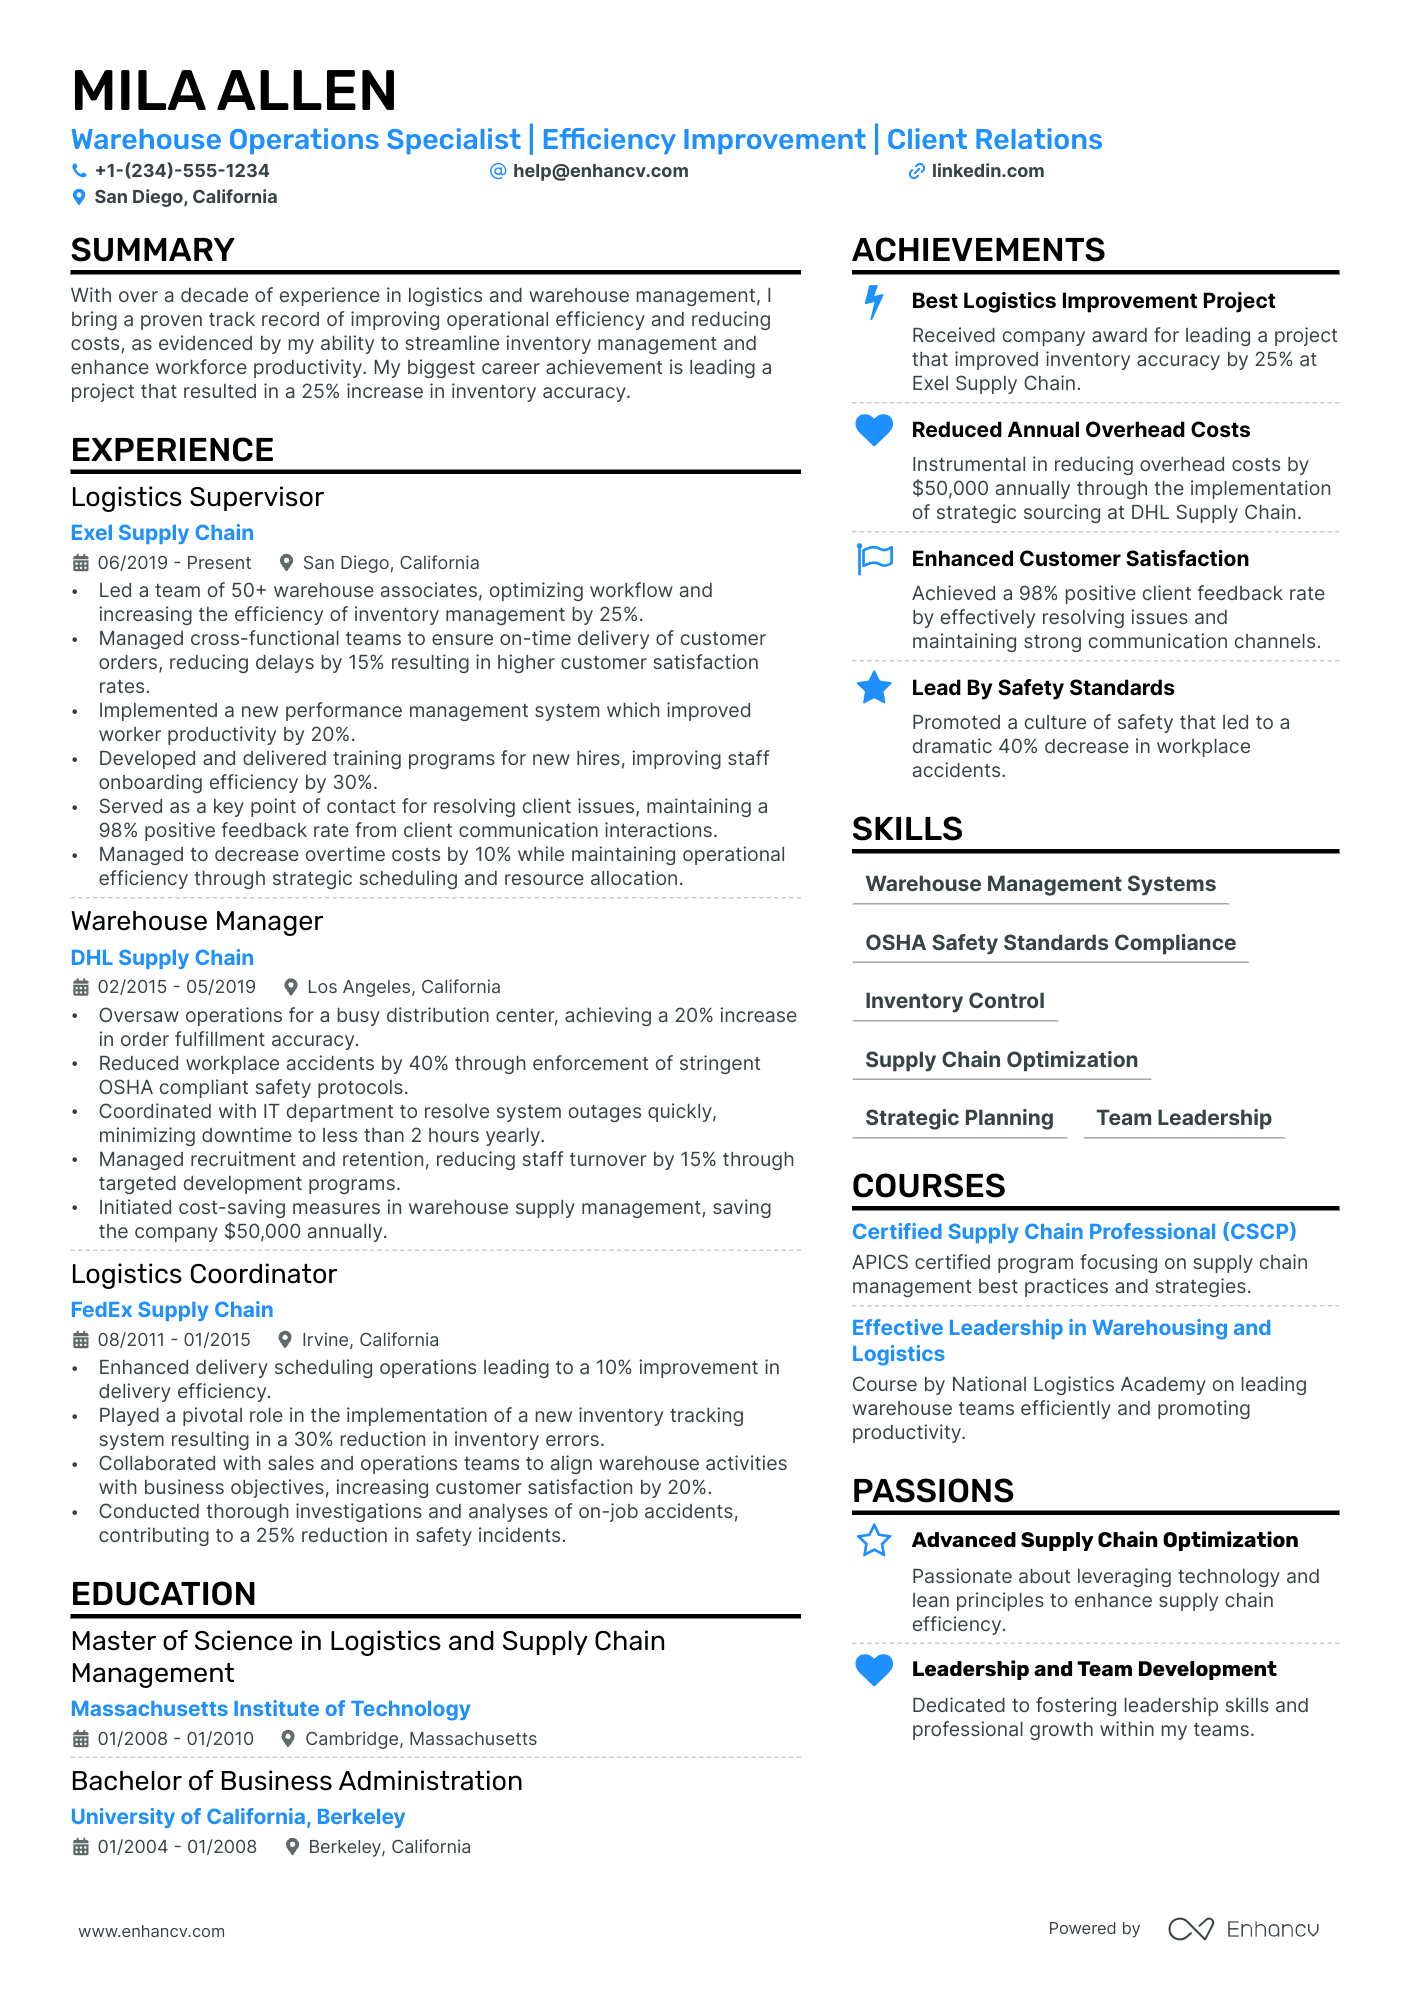 sample resume for project manager construction